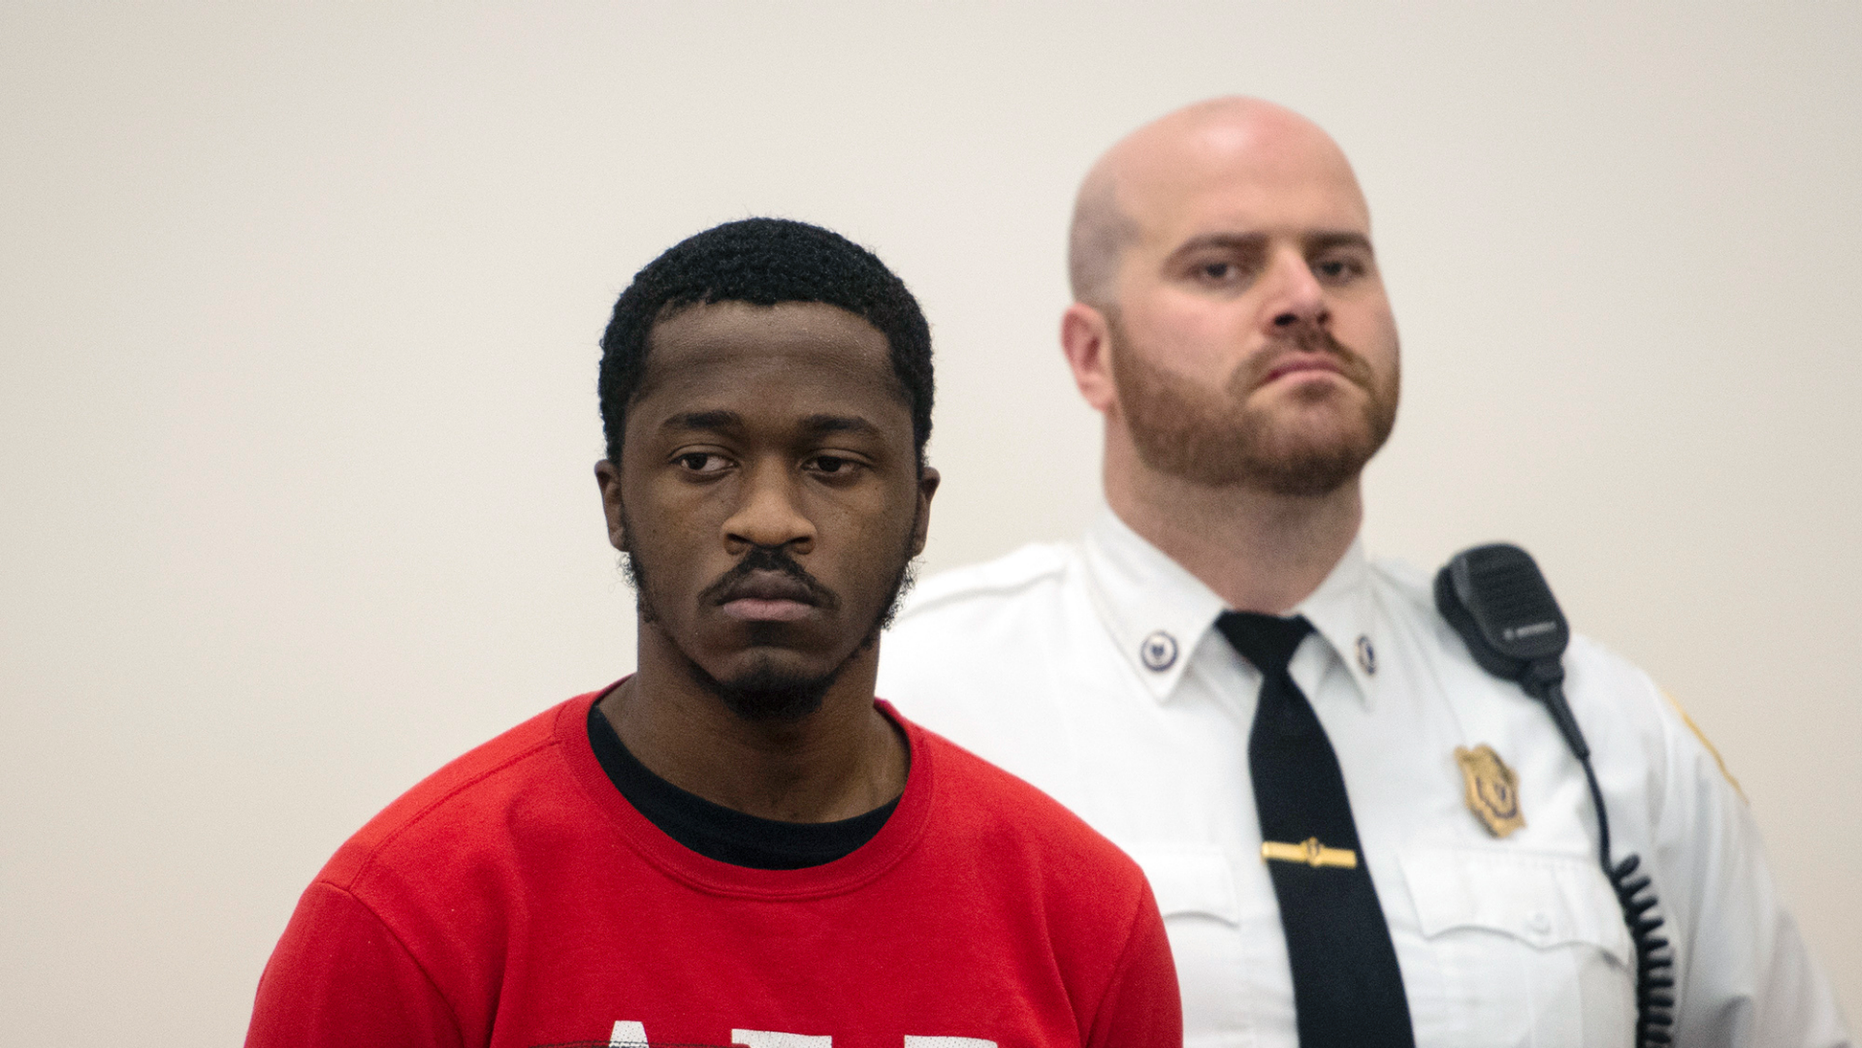 Momoh Kamara, 21, of West Boylston, is appearing in Worcester Superior Court on Friday, March 15, 2019 in Worcester, Massachusetts. Worcester District Attorney, Joseph Early Jr., announced Friday that a former tenant, Momoh Kamara, 21, had charged with second-degree murder, arson and burglary. (Ashley Green / Worcester Telegram & Gazette via AP)